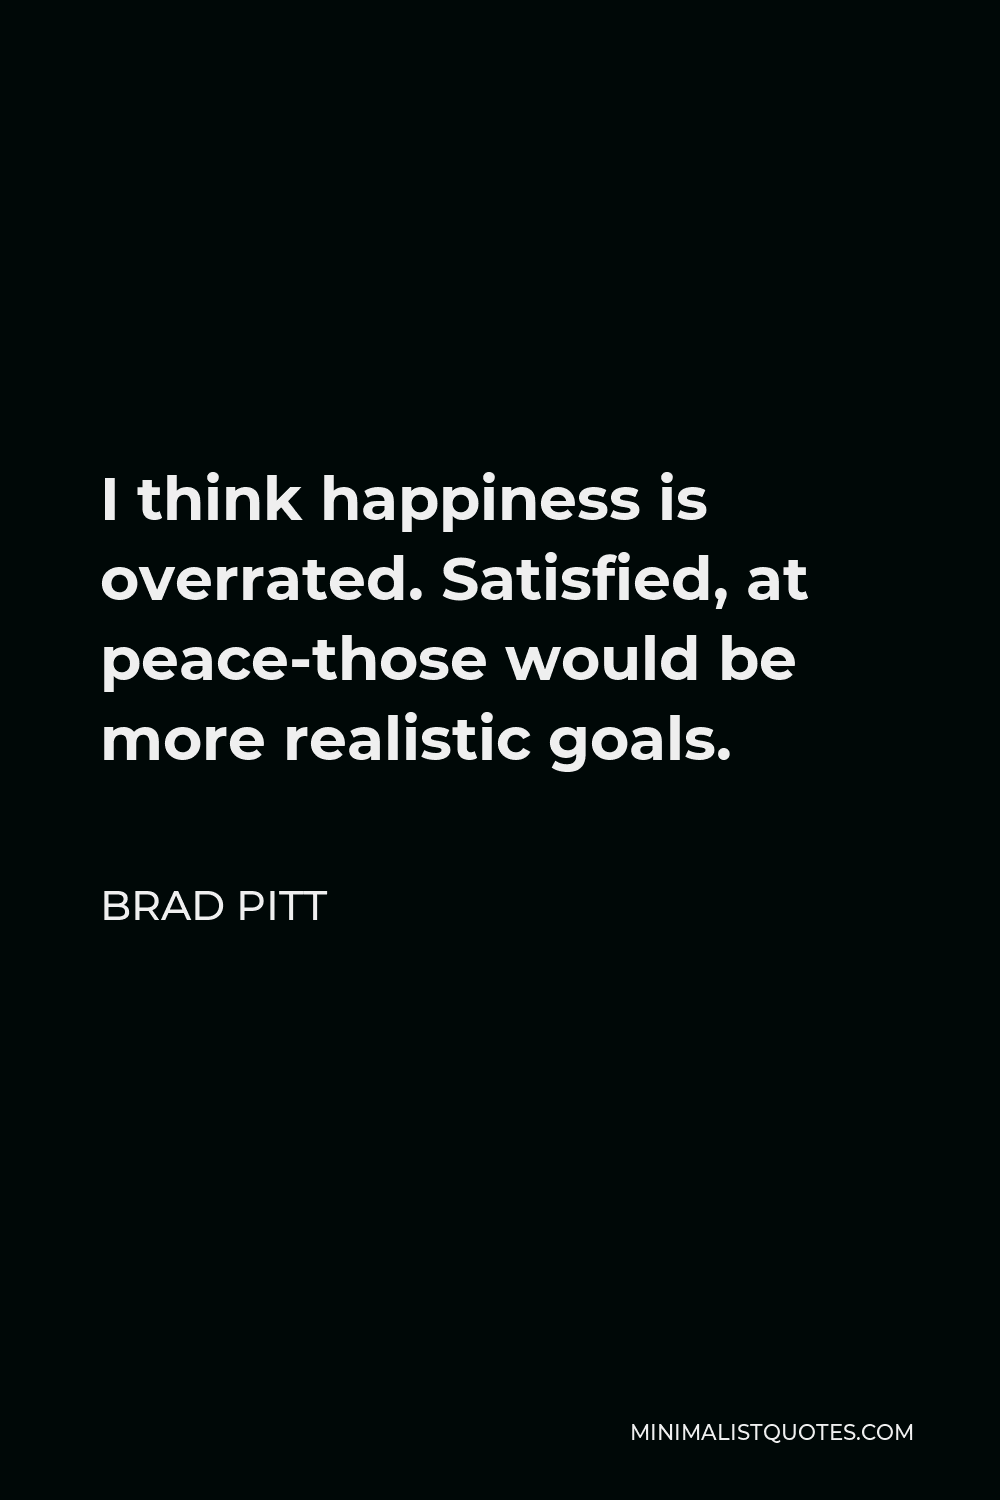 Brad Pitt Quote - I think happiness is overrated. Satisfied, at peace-those would be more realistic goals.